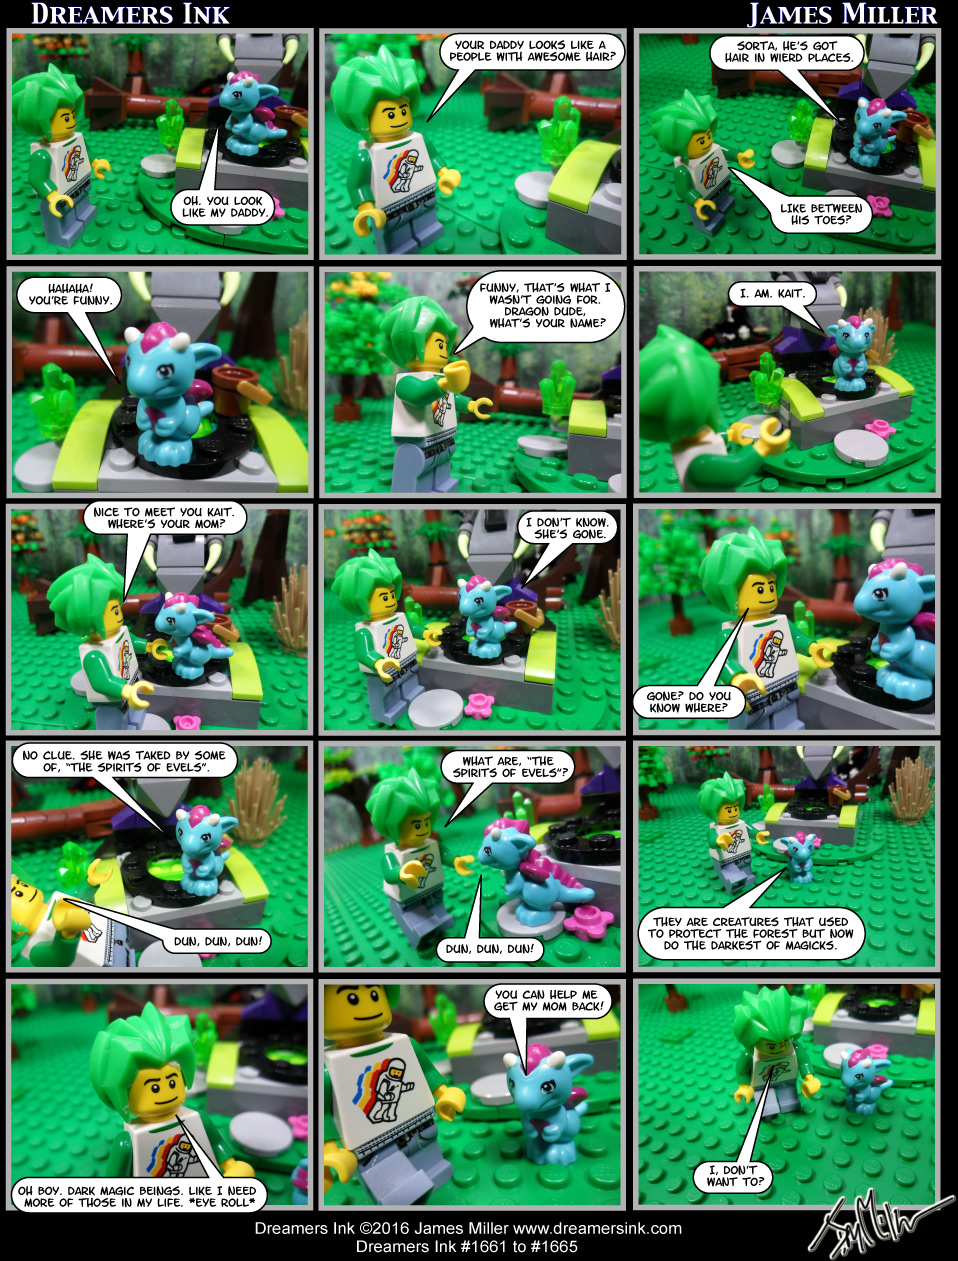 Strips #1661 To #1665